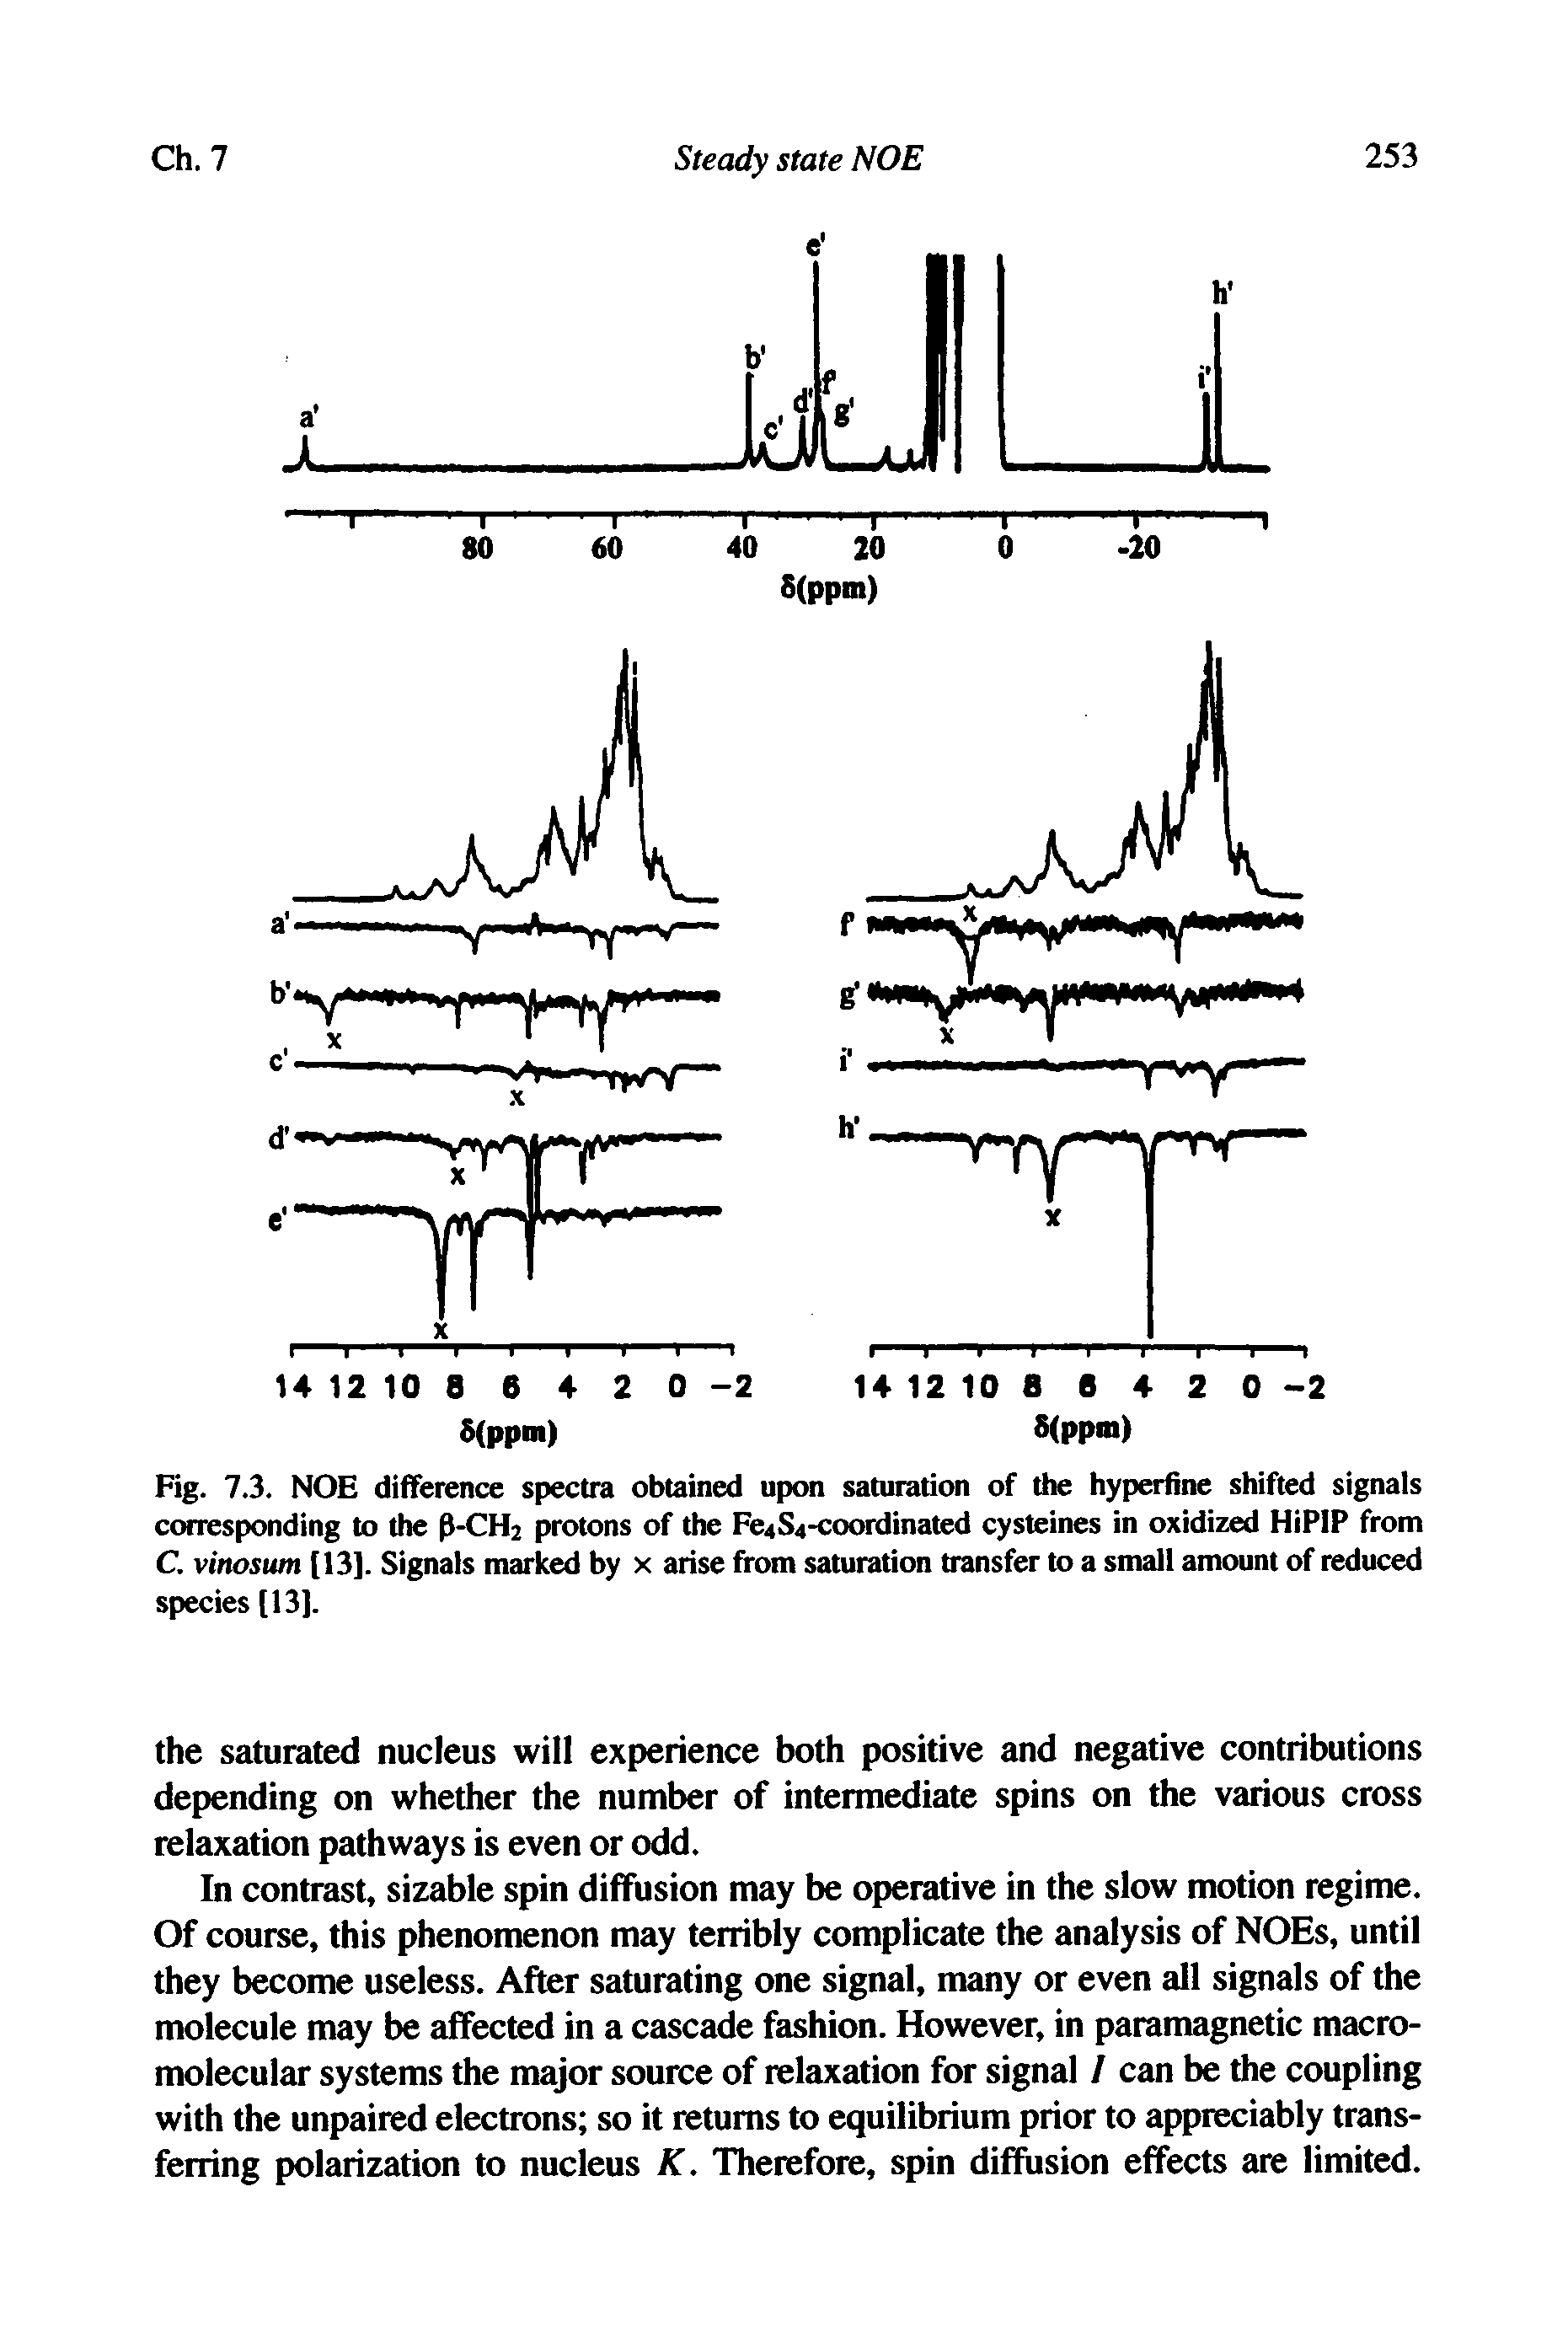 Fig. 7.3. NOE difference spectra obtained upon saturation of the hyperfine shifted signals corresponding to the P-CH2 protons of the Fe4S4-coordinated cysteines in oxidized HiPIP from C. vinosum [13]. Signals marked by x arise from saturation transfer to a small amount of reduced species [13].